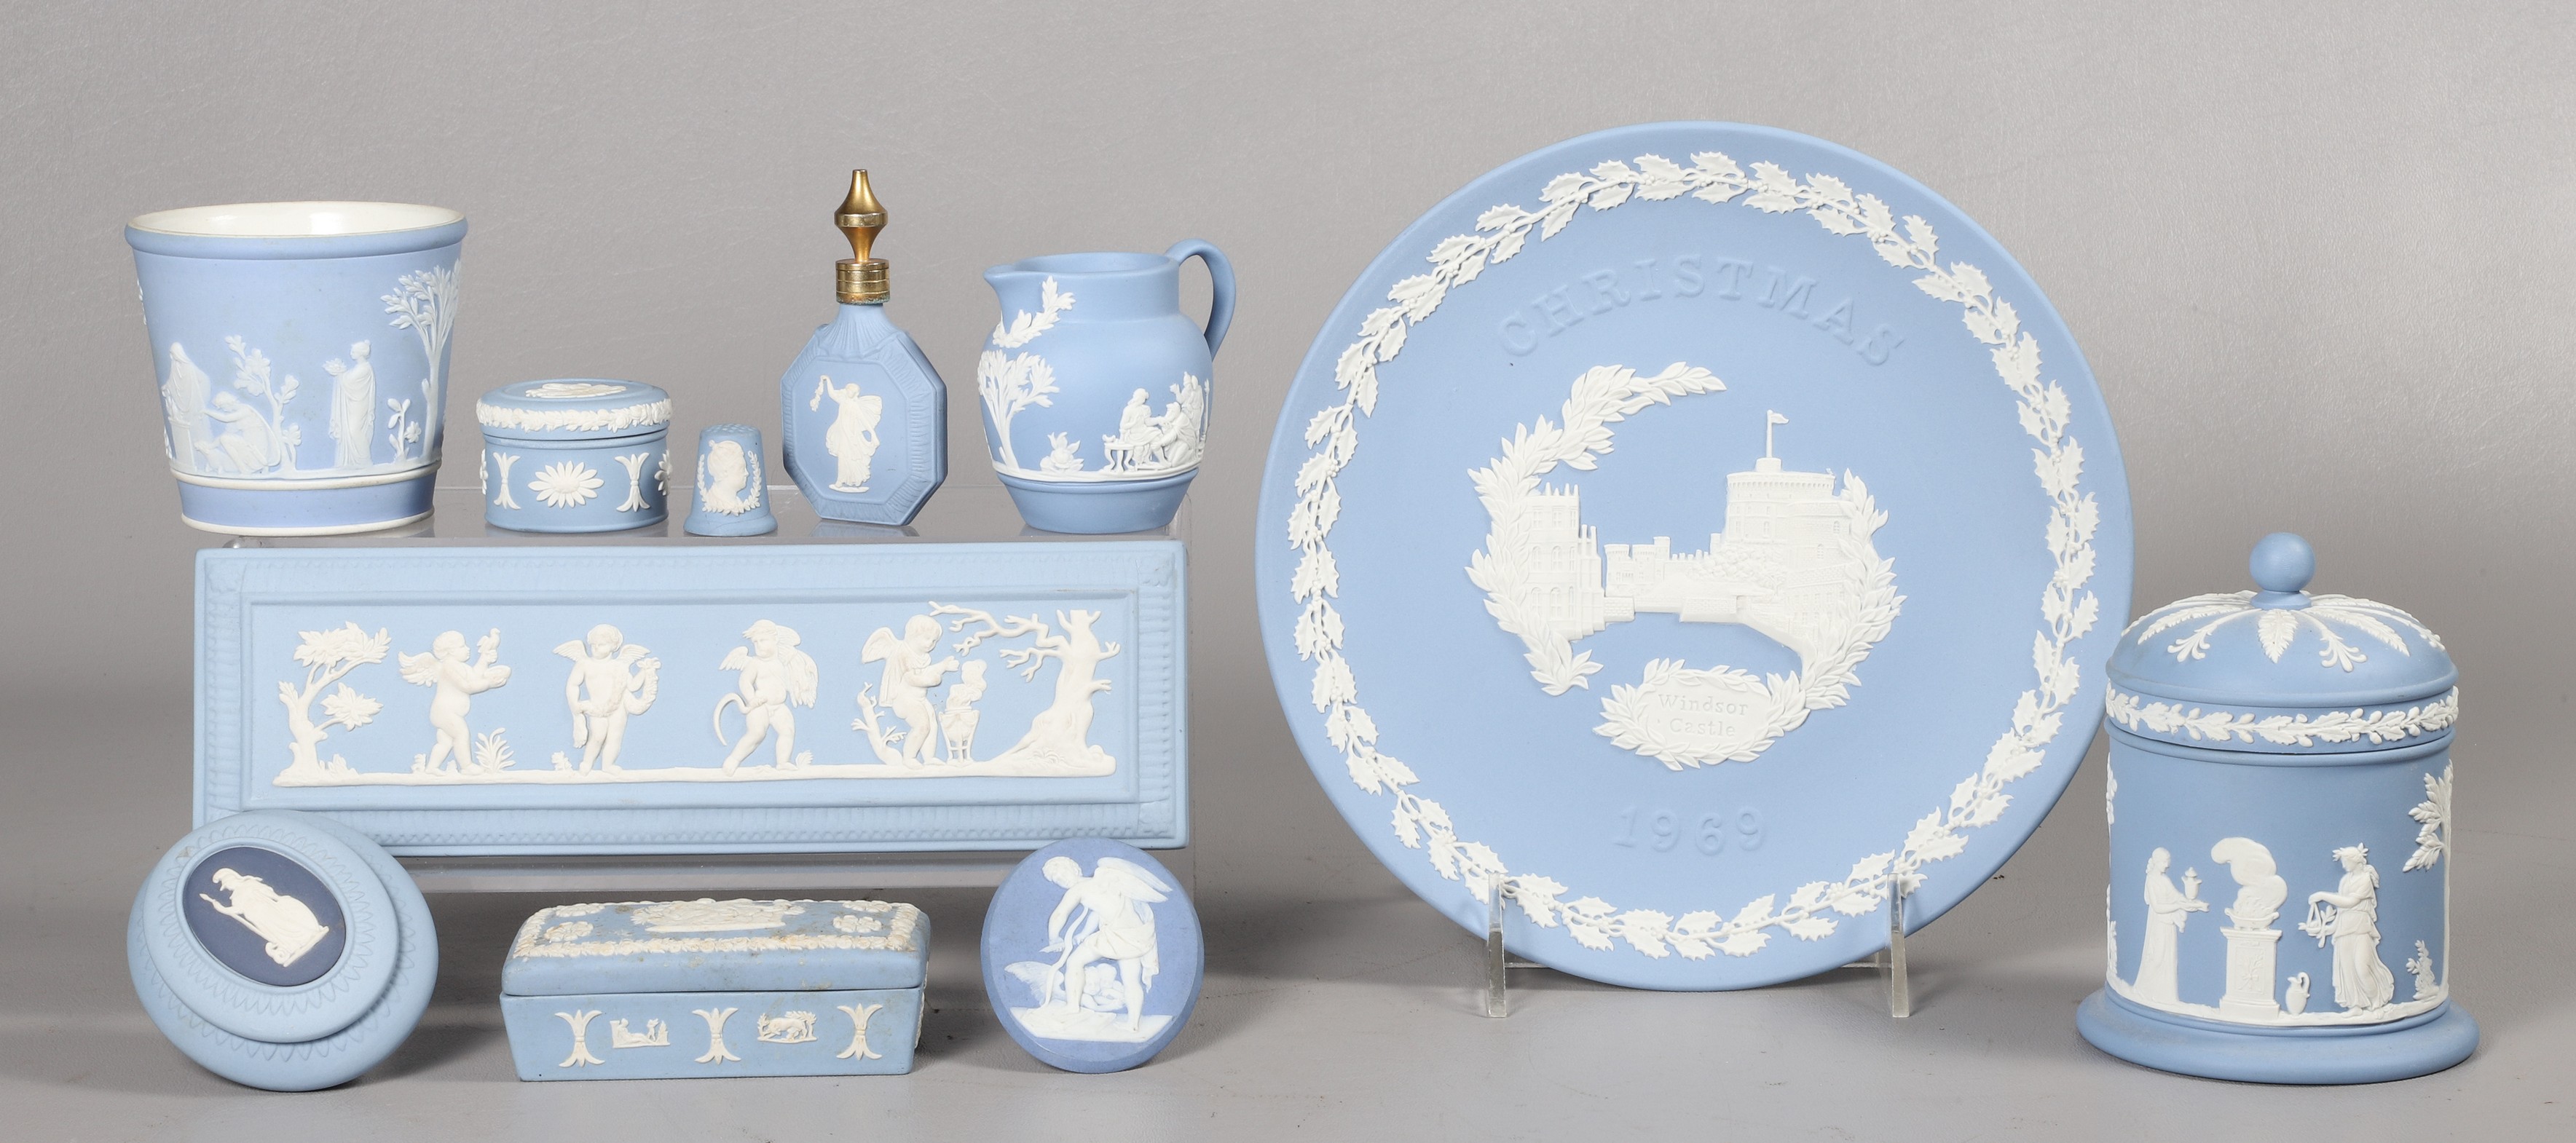  11 Wedgwood articles to include 2e07d3